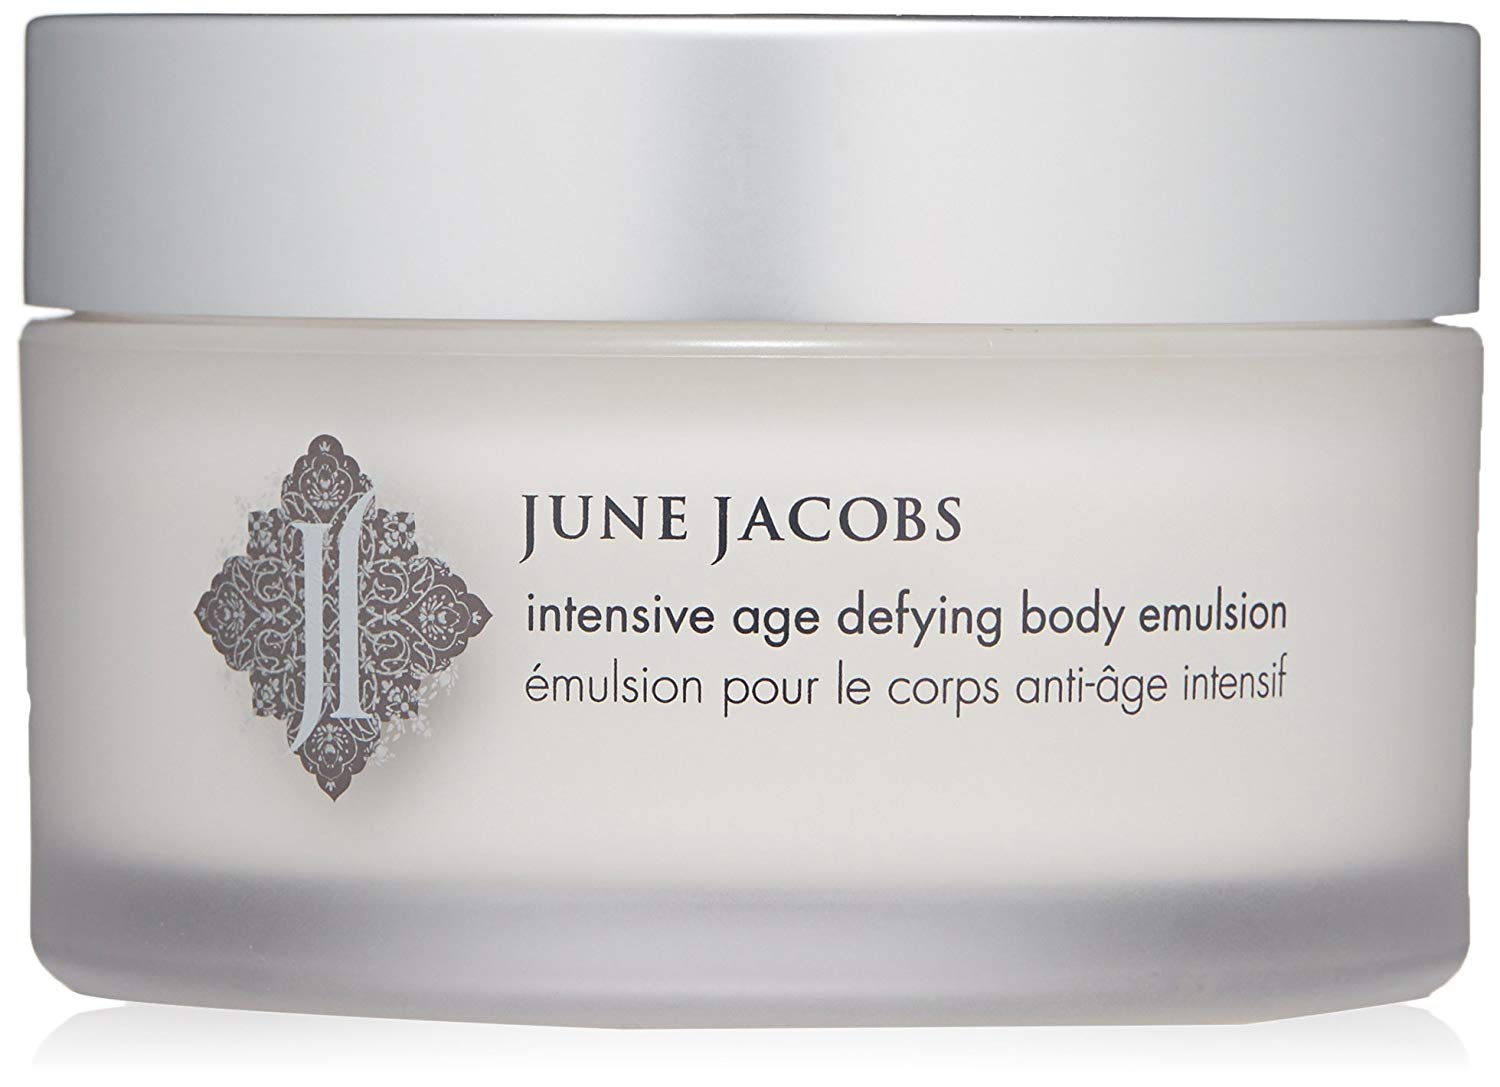 June Jacobs Intensive Age Defying Body Emulsion  6.7oz/200ml New With Box - image 2 of 2